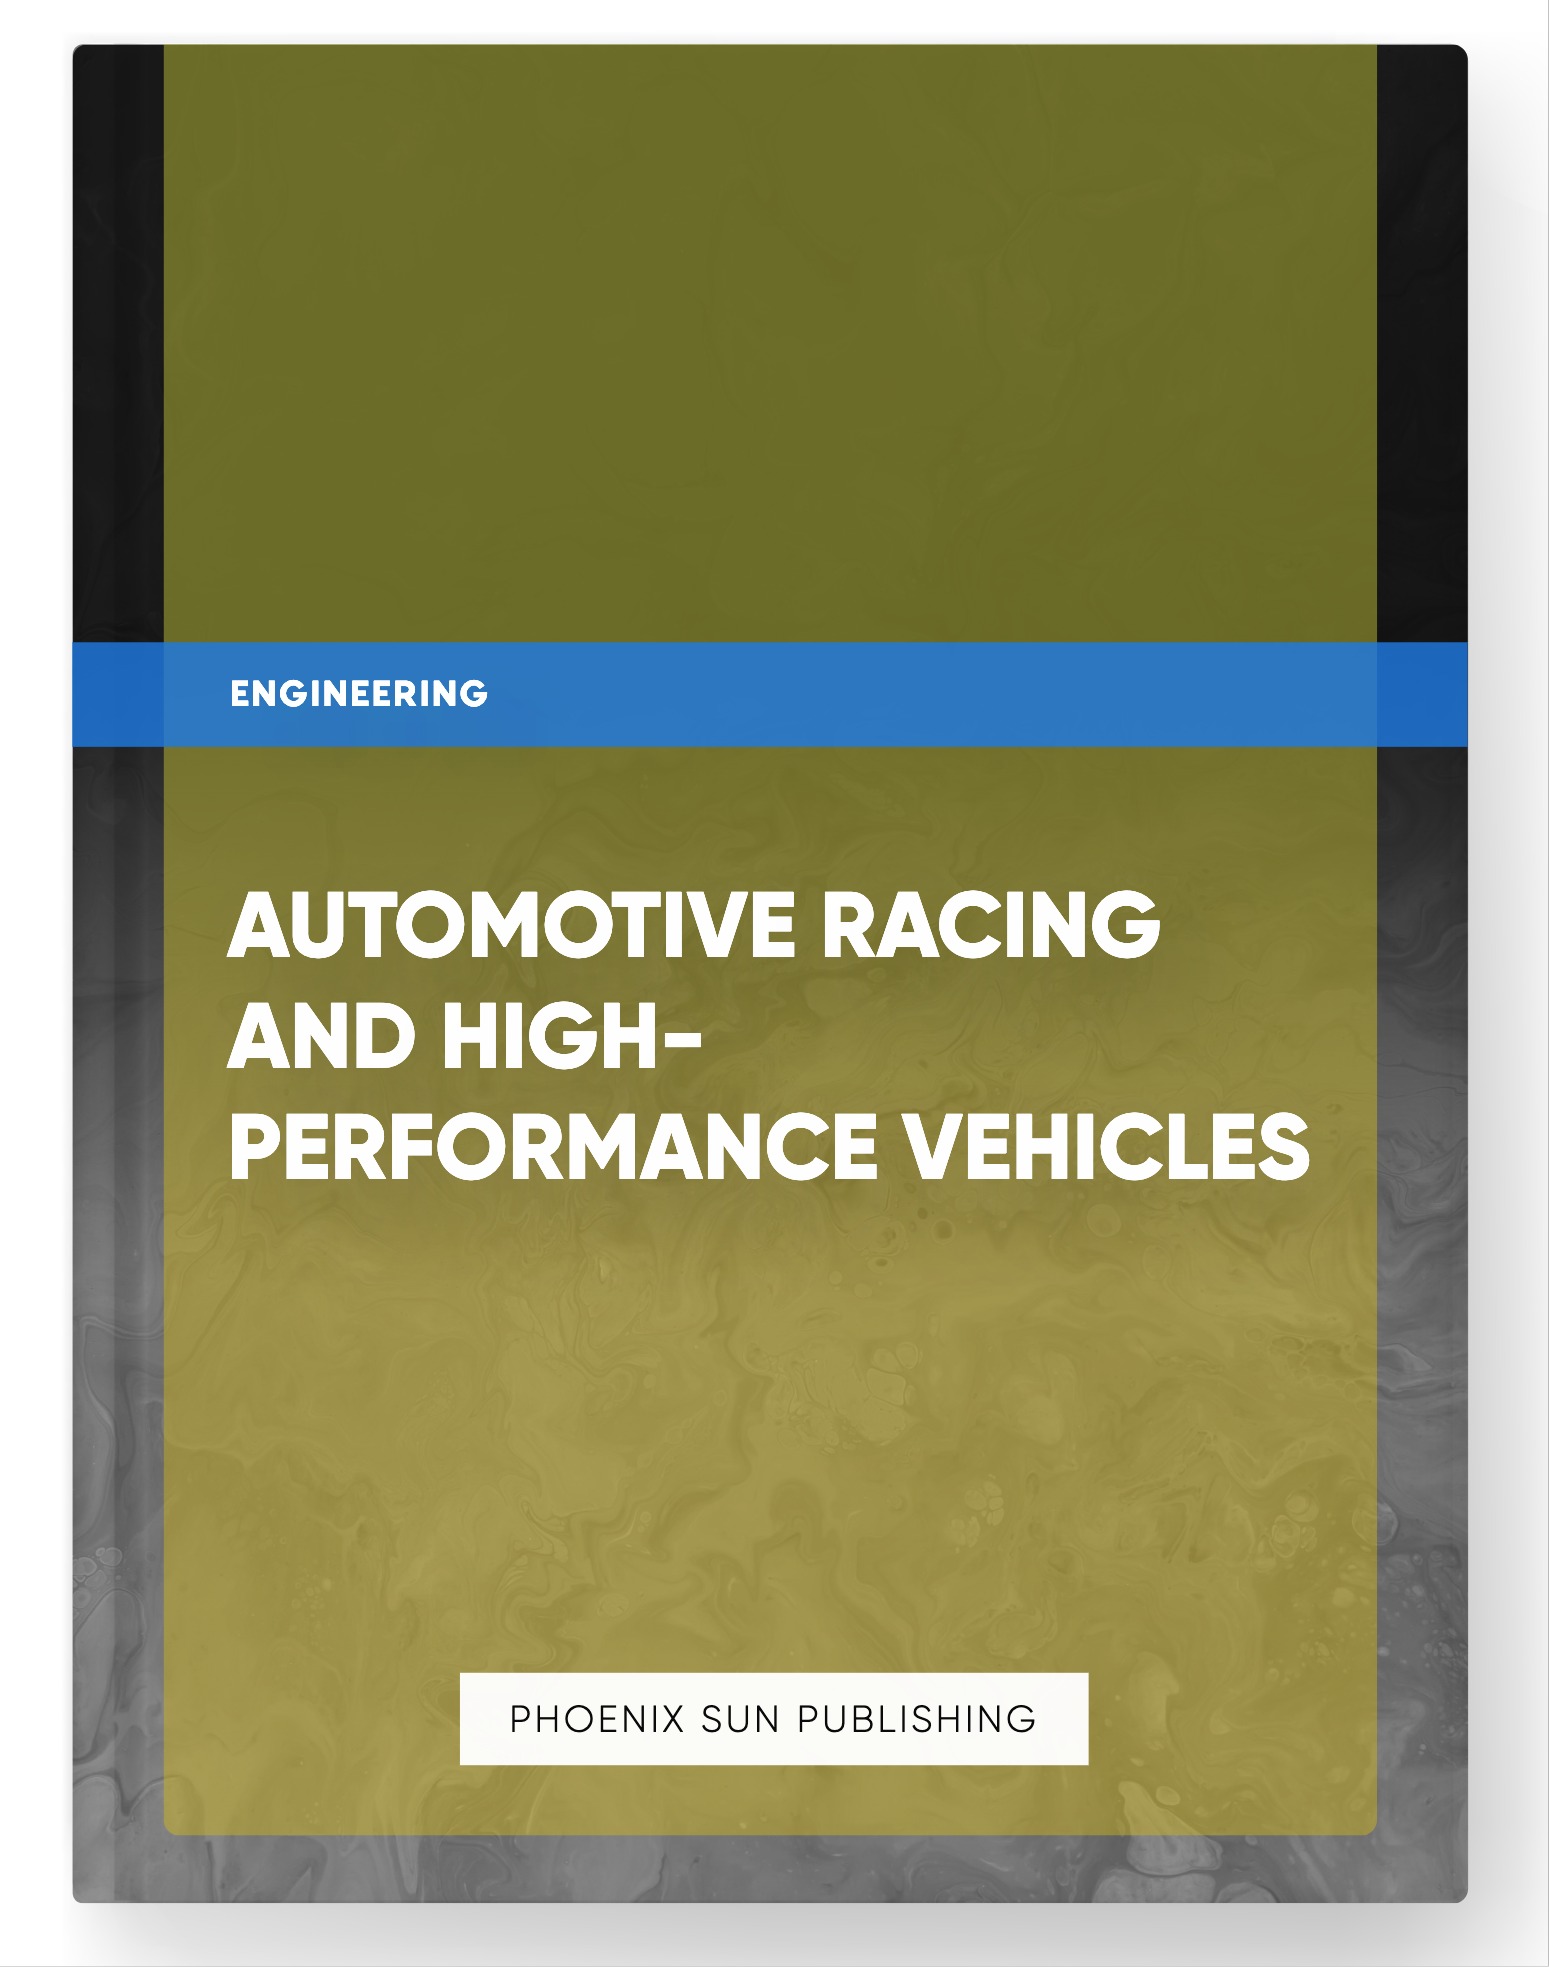 Automotive Racing and High-Performance Vehicles